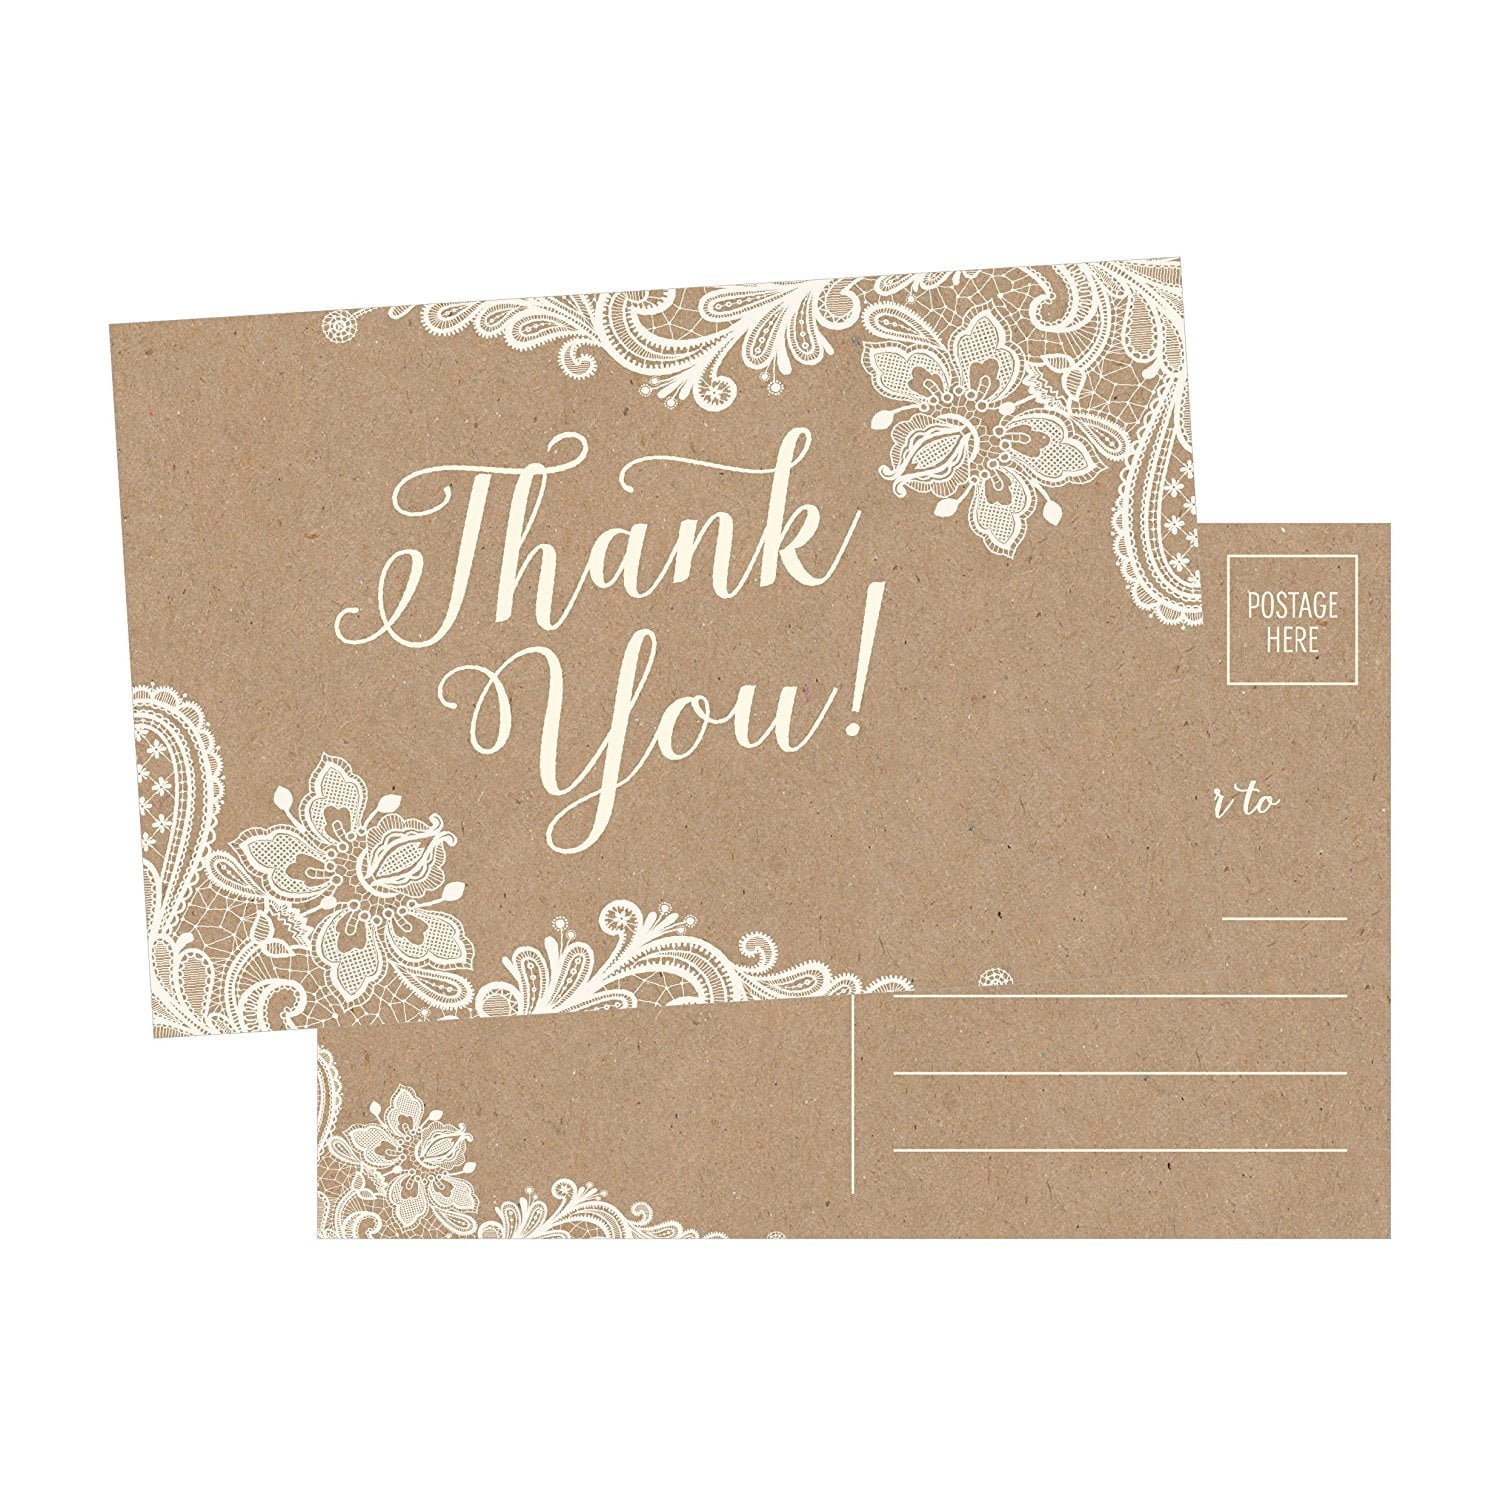 PERSONALISED VINTAGE POSTCARD PHOTO WEDDING THANK YOU CARDS PACKS OF 10